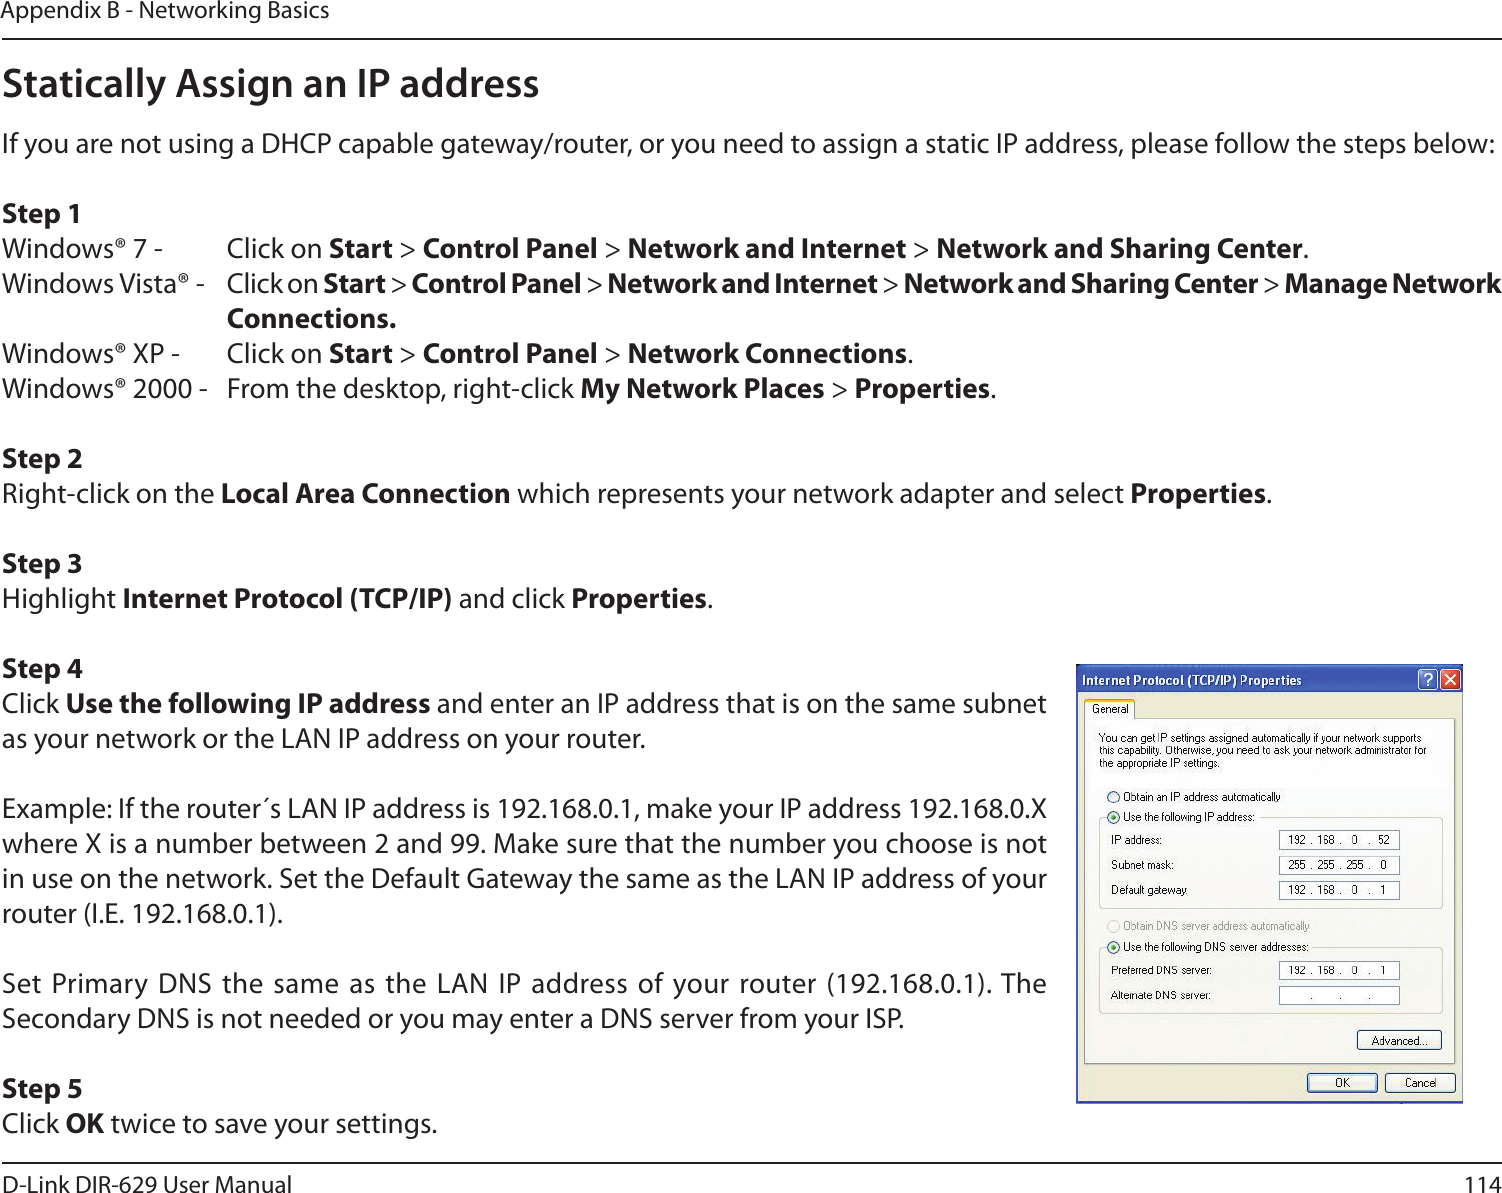 114D-Link DIR-629 User ManualAppendix B - Networking BasicsStatically Assign an IP addressIf you are not using a DHCP capable gateway/router, or you need to assign a static IP address, please follow the steps below:Step 1Windows® 7 -  Click on Start &gt; Control Panel &gt; Network and Internet &gt; Network and Sharing Center.Windows Vista® -  Click on Start &gt; Control Panel &gt; Network and Internet &gt; Network and Sharing Center &gt; Manage Network    Connections.Windows® XP -  Click on Start &gt; Control Panel &gt; Network Connections.Windows® 2000 -  From the desktop, right-click My Network Places &gt; Properties. which represents your network adapter and select Properties.Step 3Highlight  and click Properties.Step 4Click Use the following IP address and enter an IP address that is on the same subnet as your network or the LAN IP address on your router. Example: If the router´s LAN IP address is 192.168.0.1, make your IP address 192.168.0.X where X is a number between 2 and 99. Make sure that the number you choose is not in use on the network. Set the Default Gateway the same as the LAN IP address of your router (I.E. 192.168.0.1). Set Primary DNS the same as the LAN IP address of your router (192.168.0.1). The Secondary DNS is not needed or you may enter a DNS server from your ISP.Step 5Click OK twice to save your settings.